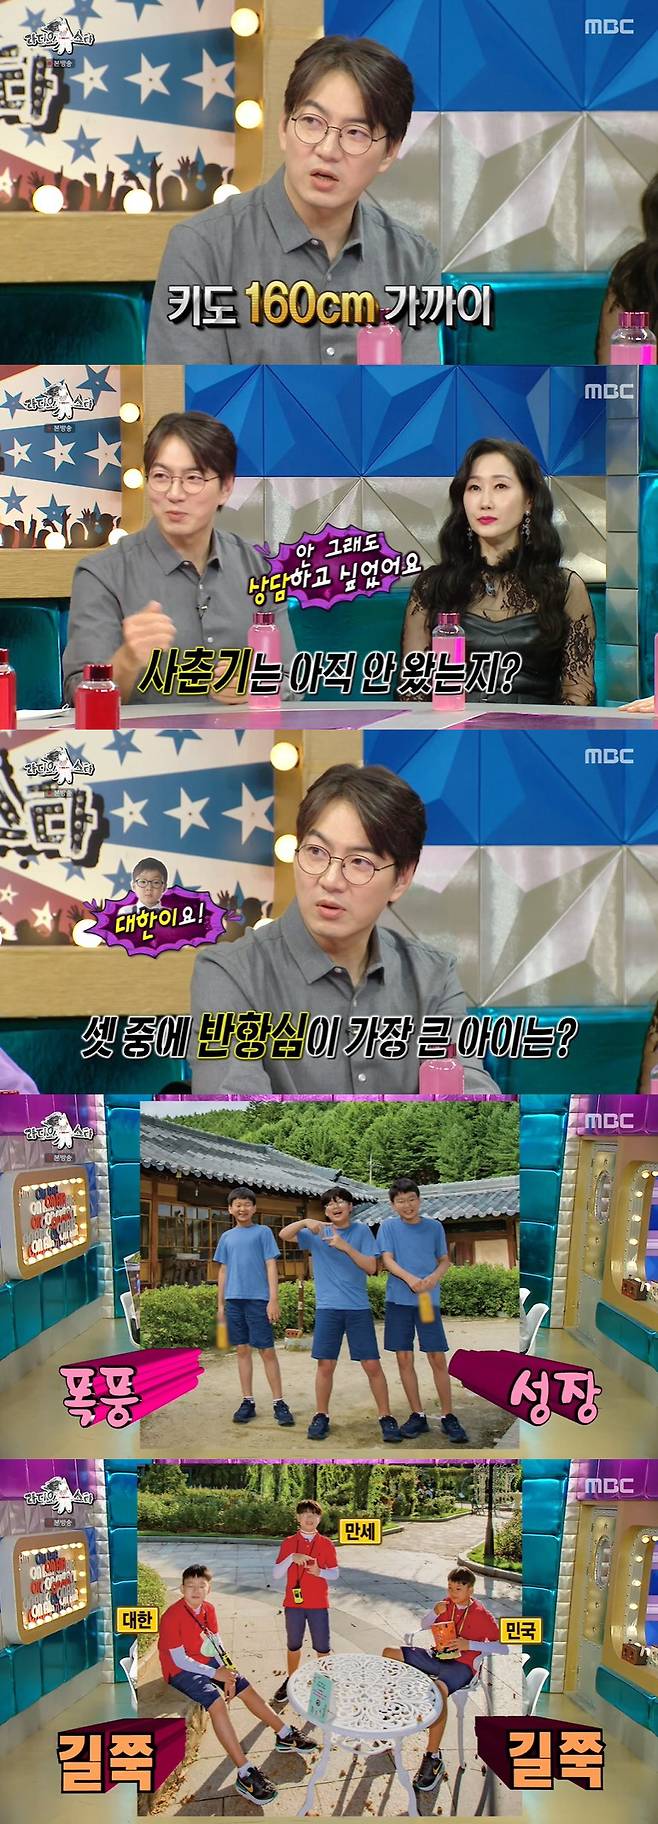 Radio Star Song Il-gook revealed the current status of the three Twins who became fourth graders.In MBC Radio Star broadcasted on the 16th, Song Il-gook, Ship line, Jung Dong-won, Jo Hye-ryun, and Trix appeared as guests.Song Il-gook, who appeared on Radio Star for the first time, revealed the current status of Three Twins, who became a fourth grader in elementary school. Song Il-gook said, The foot size is 265mm.Kim Gu said, Have not the kids been puberty yet? Song Il-gook said, I do not want to talk about it.Kim Gu said, I think Daehan is inciting his younger siblings.Three Twins, who grew up without knowing it, were released. Three Twins boasted a stretched leg as if they had grown up.Song Il-gook said, The children do not have a cell phone yet. It is a walkie-talkie that is hanging around their necks. They carry a walkie-talkie because they can not lose it. There is no plan yet.I still have three friends, so I do not feel the need because I play well with them. Song Il-gook said, Min-guk Lee resembled Do-hwan Bae.Do-hwan Bae came to the wedding ceremony and said, Please give birth to a child who resembles me. Now it looks like Choi Woo-shik.Song Il-gook said, Daehan is a militarist. He already has a GFriend.Father has a lot of gray hair, he said, you are in a bad mood, and said, So my grandmother has a lot of gray hair. Song Il-gook said, Hurray is a troublemaker. He is curious and looks like me. Kim Gu asked, Are all the kids studying well? Song Il-gook laughed silently.Song Il-gook said, Children eat a large pizza, and when you go to a sushi restaurant, you get a lot of dishes.Song Il-gook said, What my wife always talks about is that you have to earn a lot to feed the kids. To do that, you should not eat.Sung Eun Father Song Il-gook. Song Il-gook said, It takes three days to lose 10kg, but it takes three days to lose 10kg.I went to eat makguksu with my parents, but I rubbed it, and it disappeared. I do not rub it. I just drink it.Song Il-gook also revealed his child-rearing know-how. Song Il-gook said, I am a person who does not have a lot of talent. I think it is fortunate that I succeeded as an actor. My mother has a lot of anti-Japanese movement related events.Ive been to a lot of anti-Japanese sites with my mother, so I think its not because Im lucky, but because my ancestors lived well. I think its a reward to keep my family well and live my life faithfully.As part of that, I was trying to do well for my children. Song Il-gook got a lot of responses from the child-rearing methods such as Thinking chair, Waiting for 10 seconds, and Discipline in a place without people at the time of Superman Returns.In response, Song Il-gook said, Actually, my wife set everything up. My wife does the childcare and I do it with my body. I change diapers or dress children.I think some of them have succeeded (in Shuldol) because the children are dressed beautifully, he said.